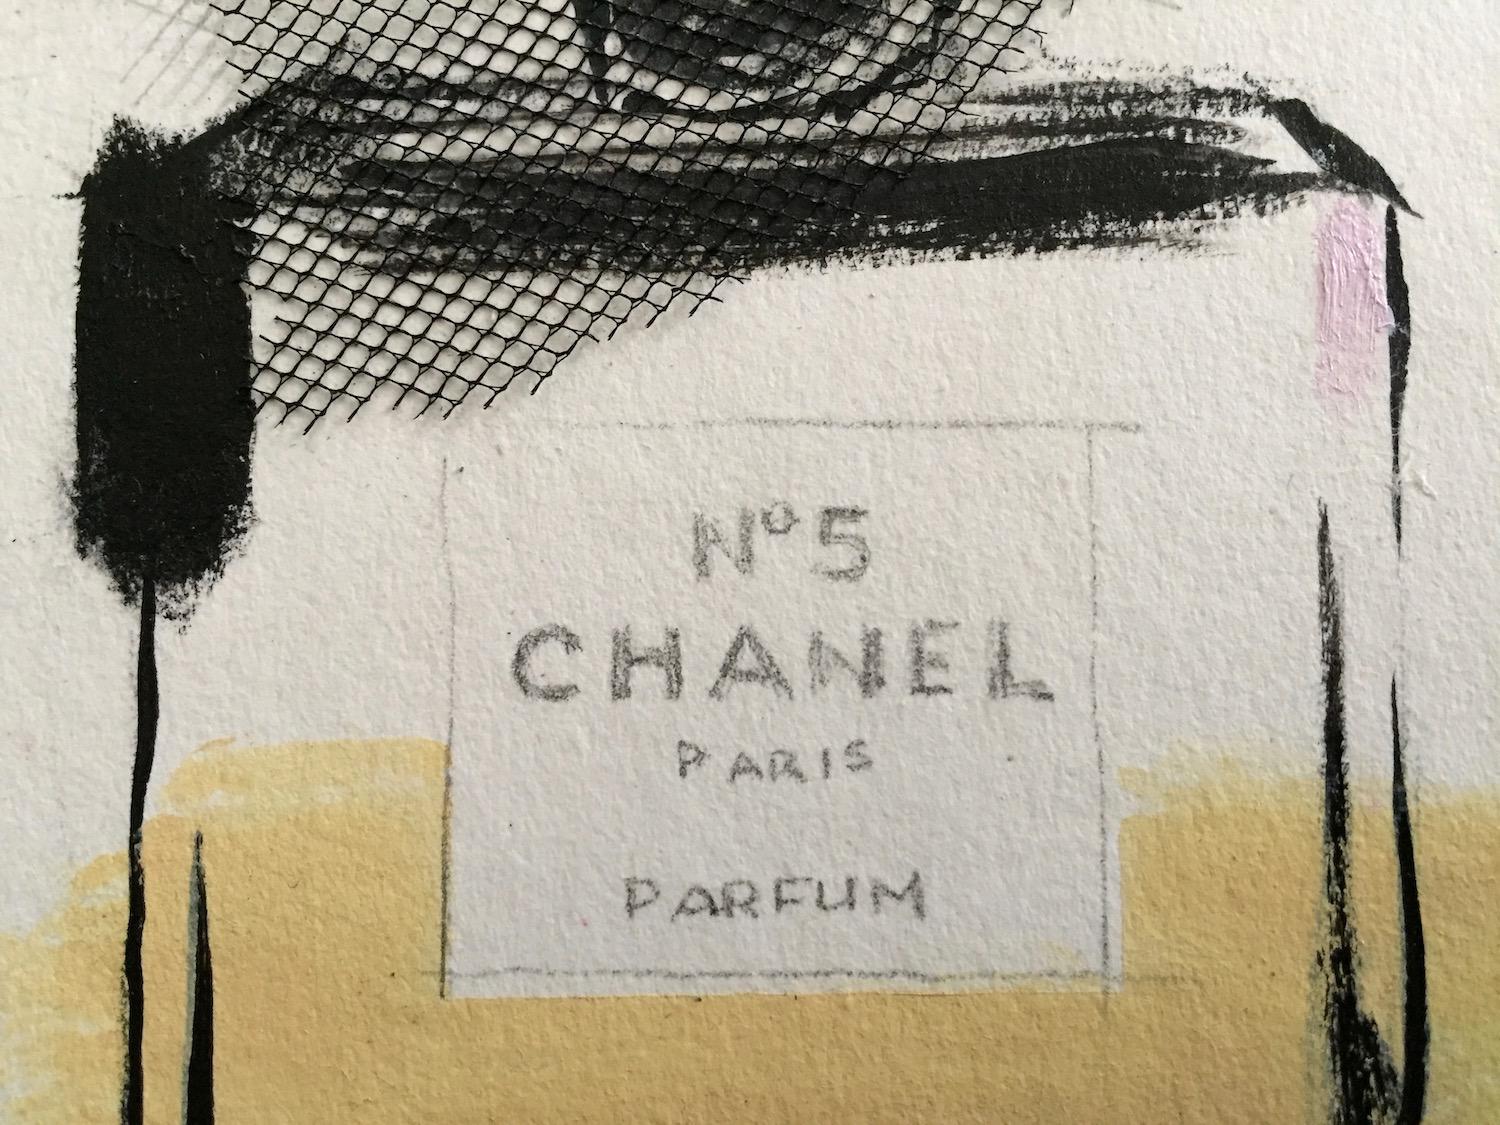 Homage to the iconic Chanel No. 5 perfume. Textured collage elements add visual interest to this mixed media work on heavy art board. Delicate detail compliments the loose brush work with an expressive outcome. (one from series of four)

Small